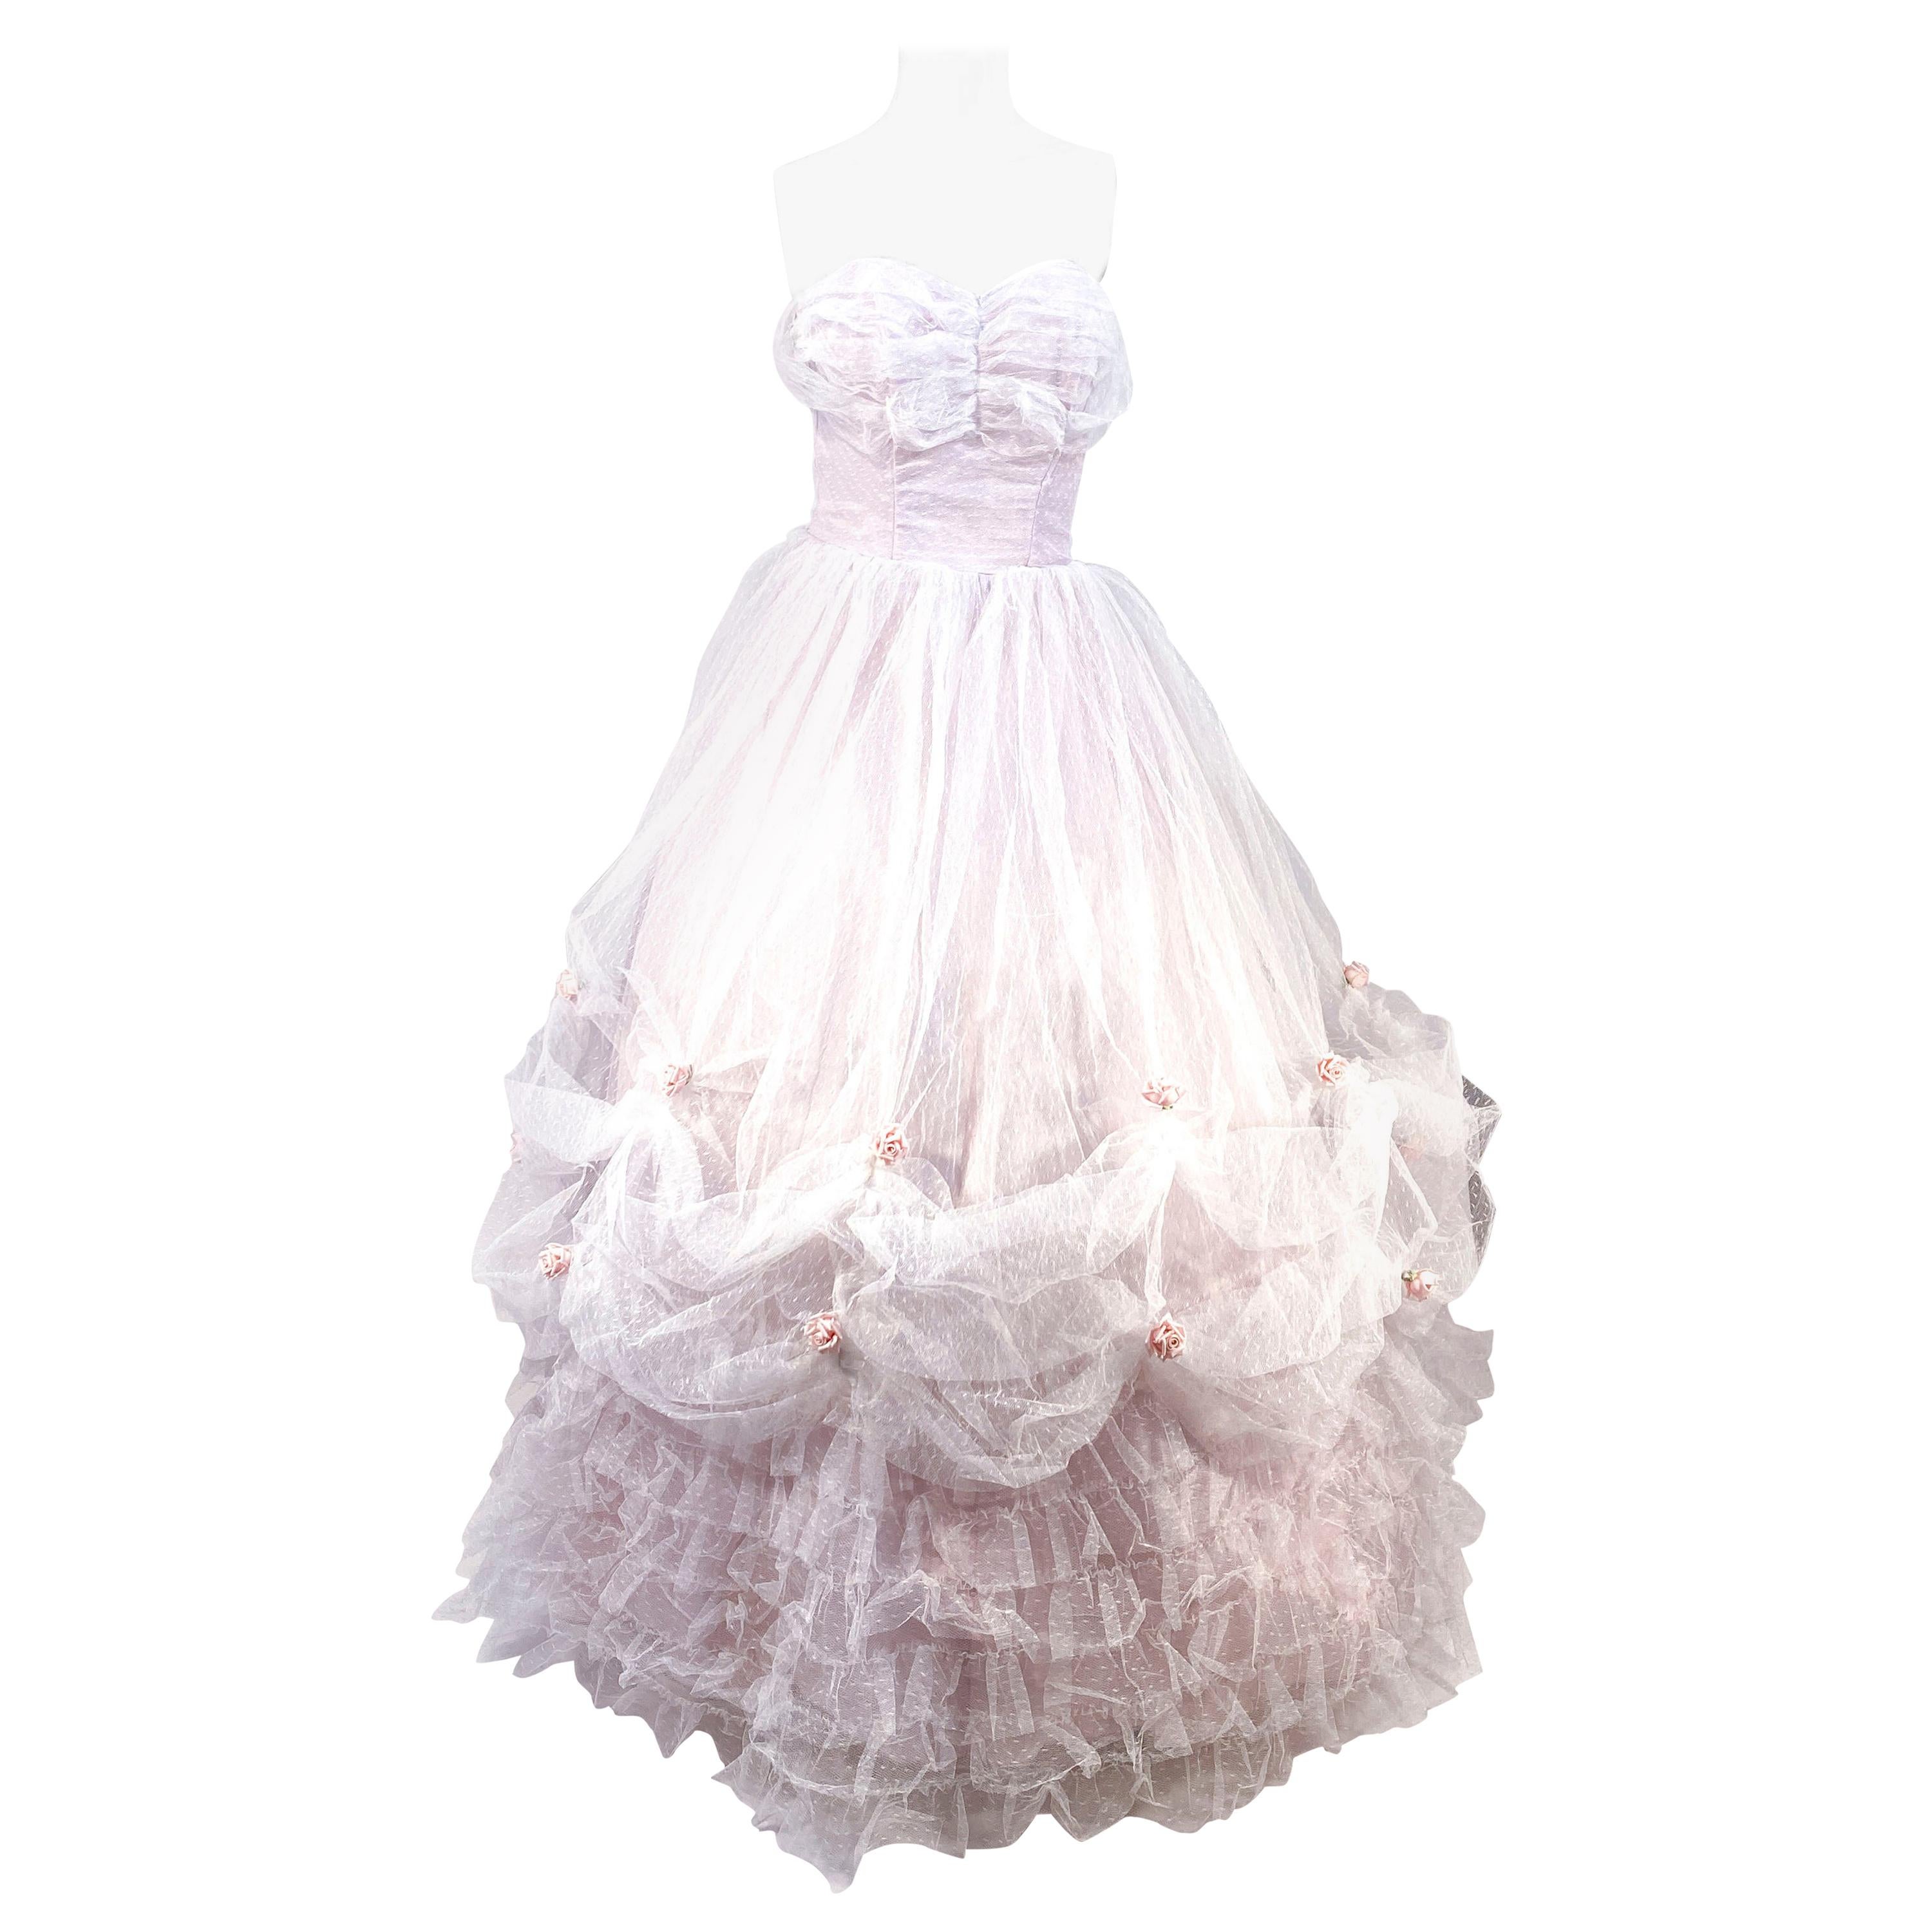 1950s White and Lavender Party Dress/Ball Gown